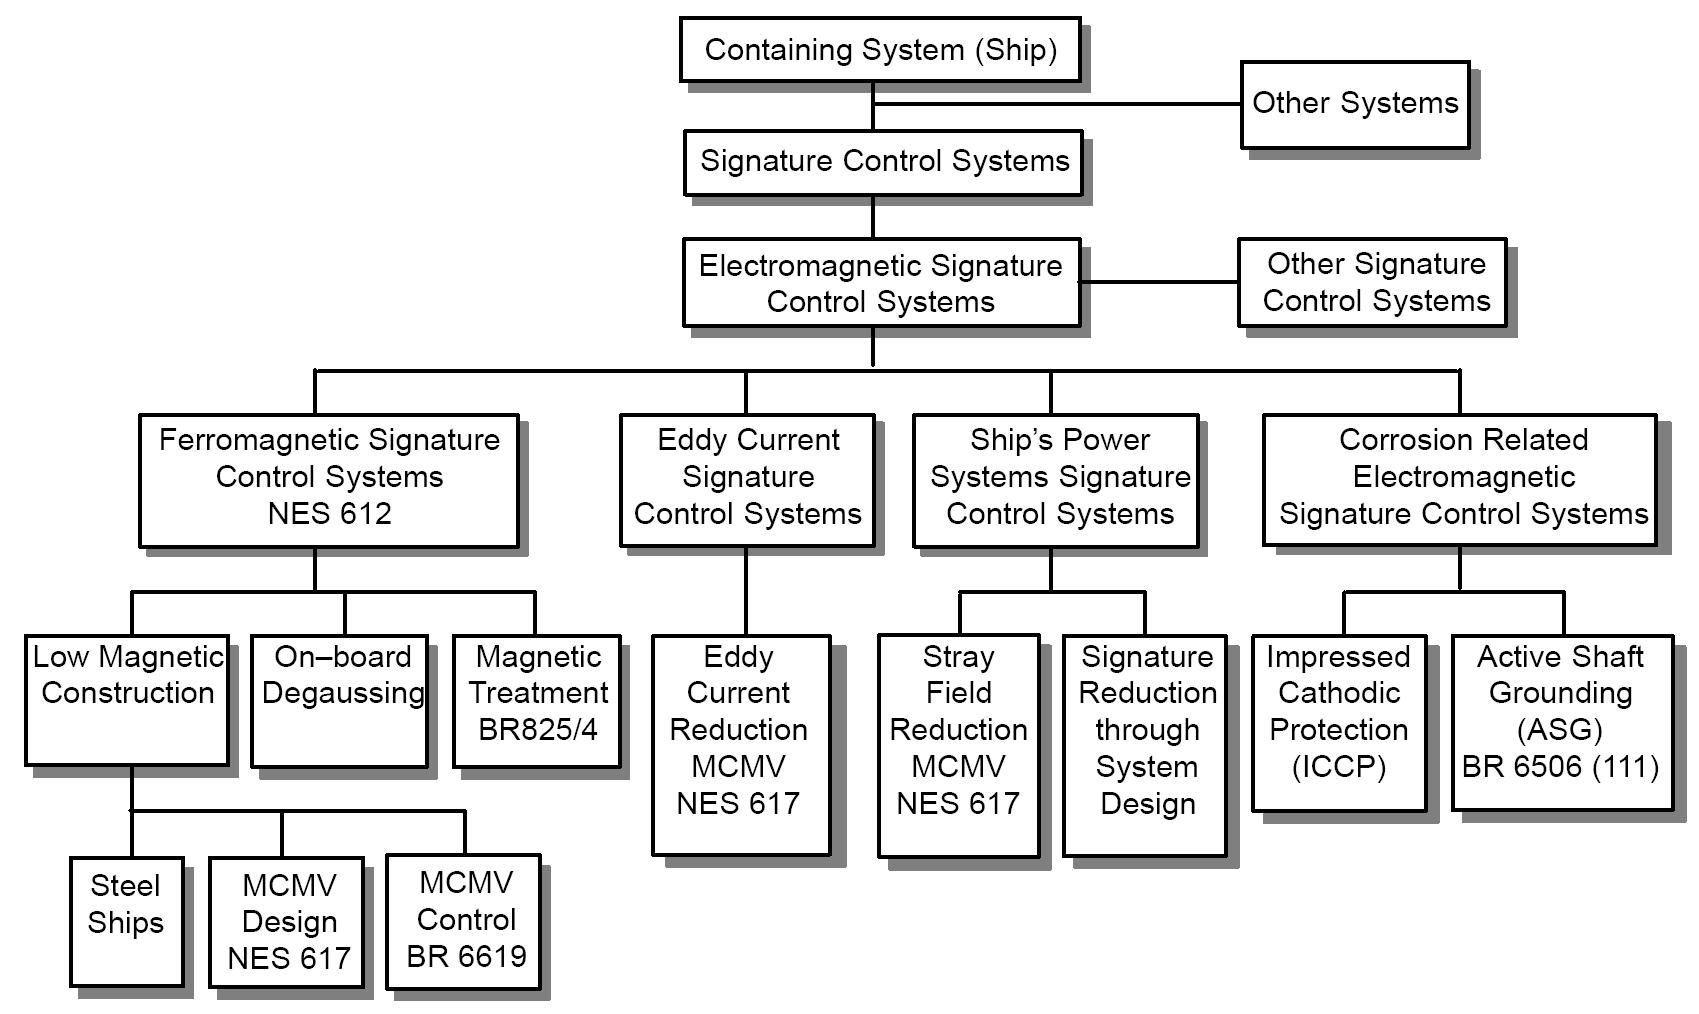 Electromagnetic Signature Control Systems Related Naval Engineering Standard (NES) and Defence Manuals.